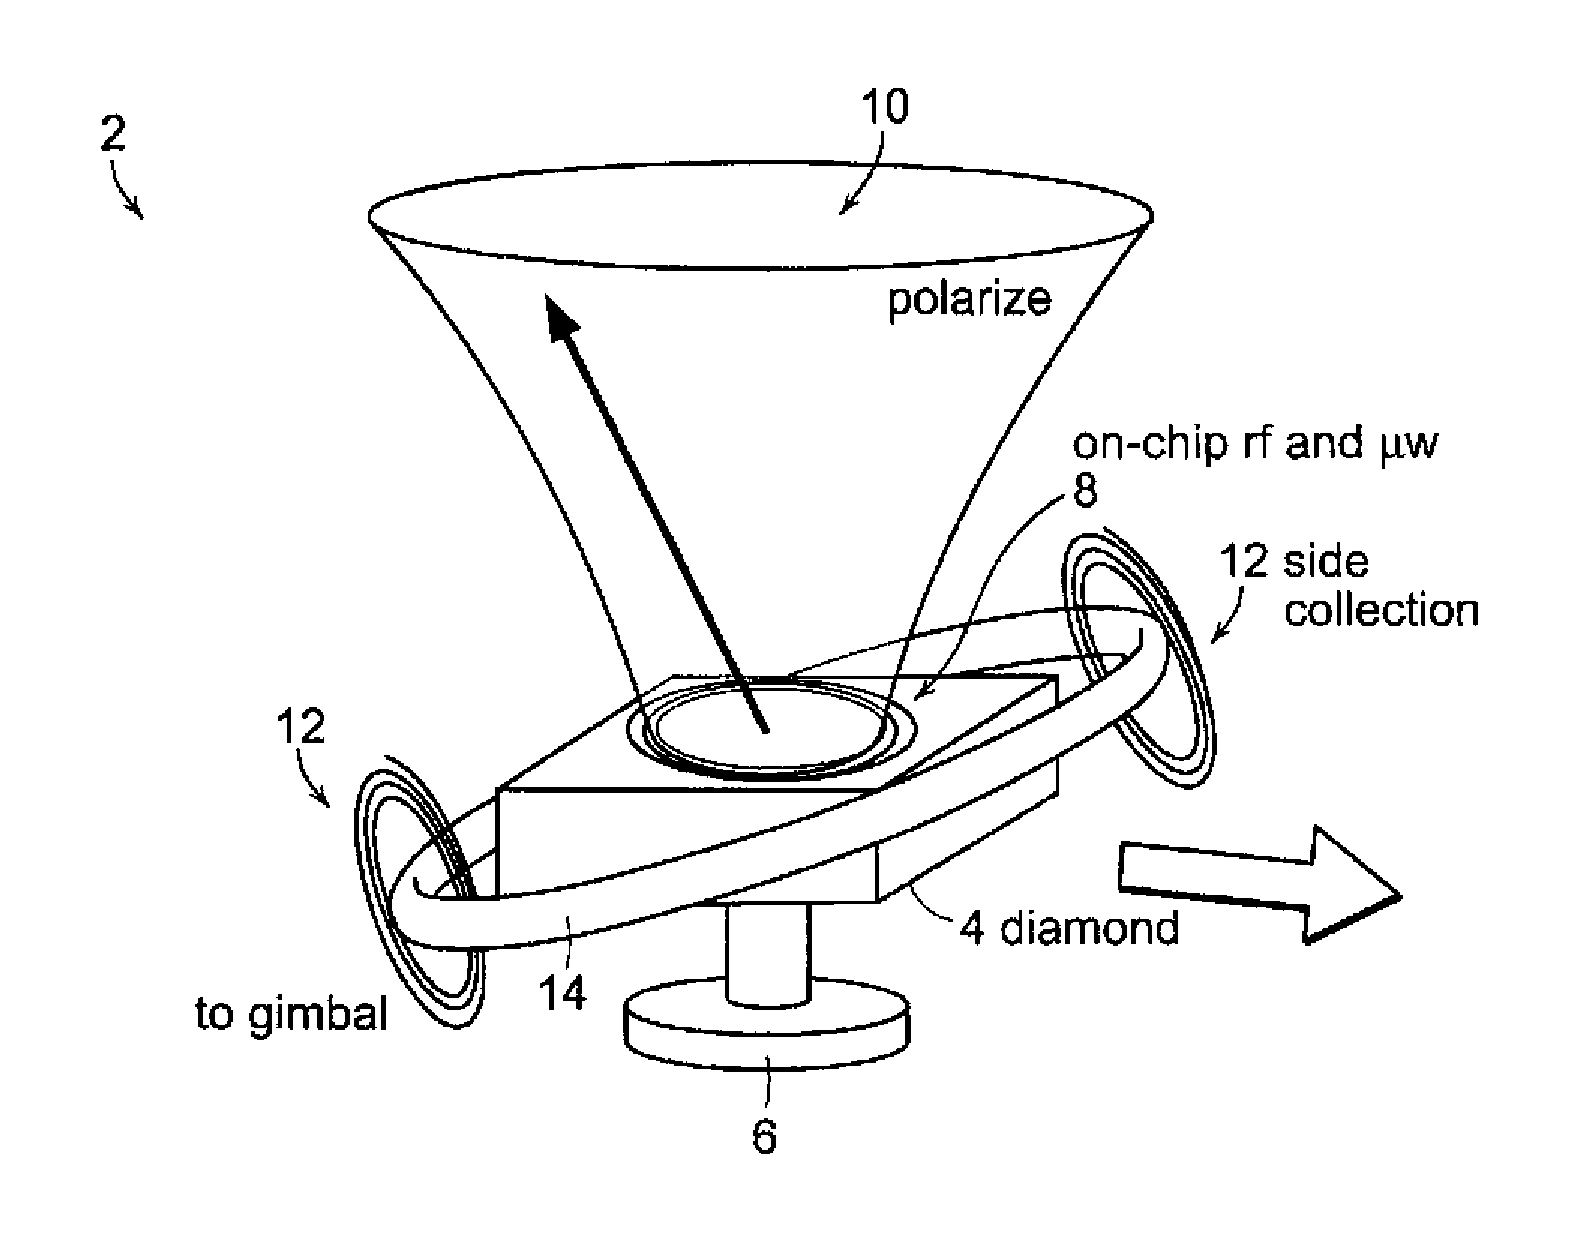 Stable three-axis nuclear spin gyroscope